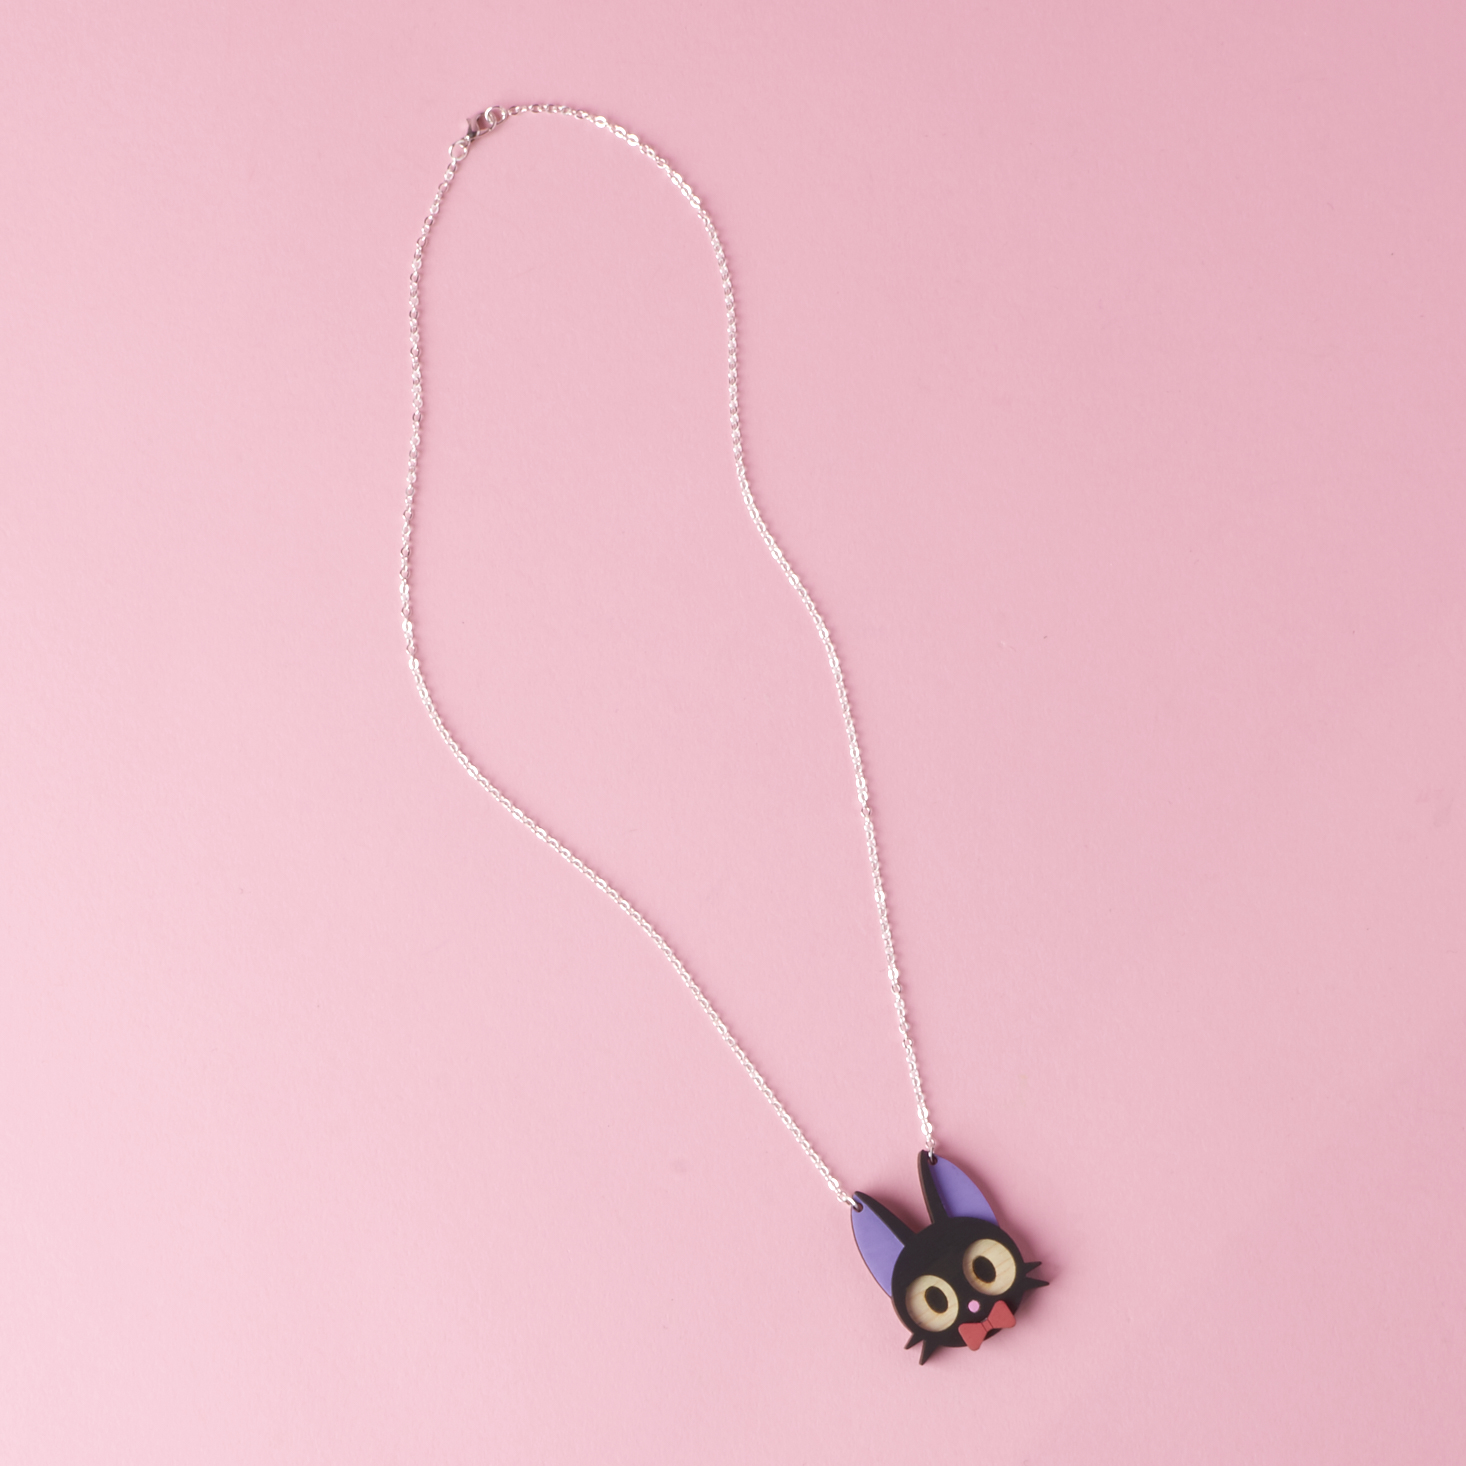 Fangirl-monthly-december-2016-jiji-necklace